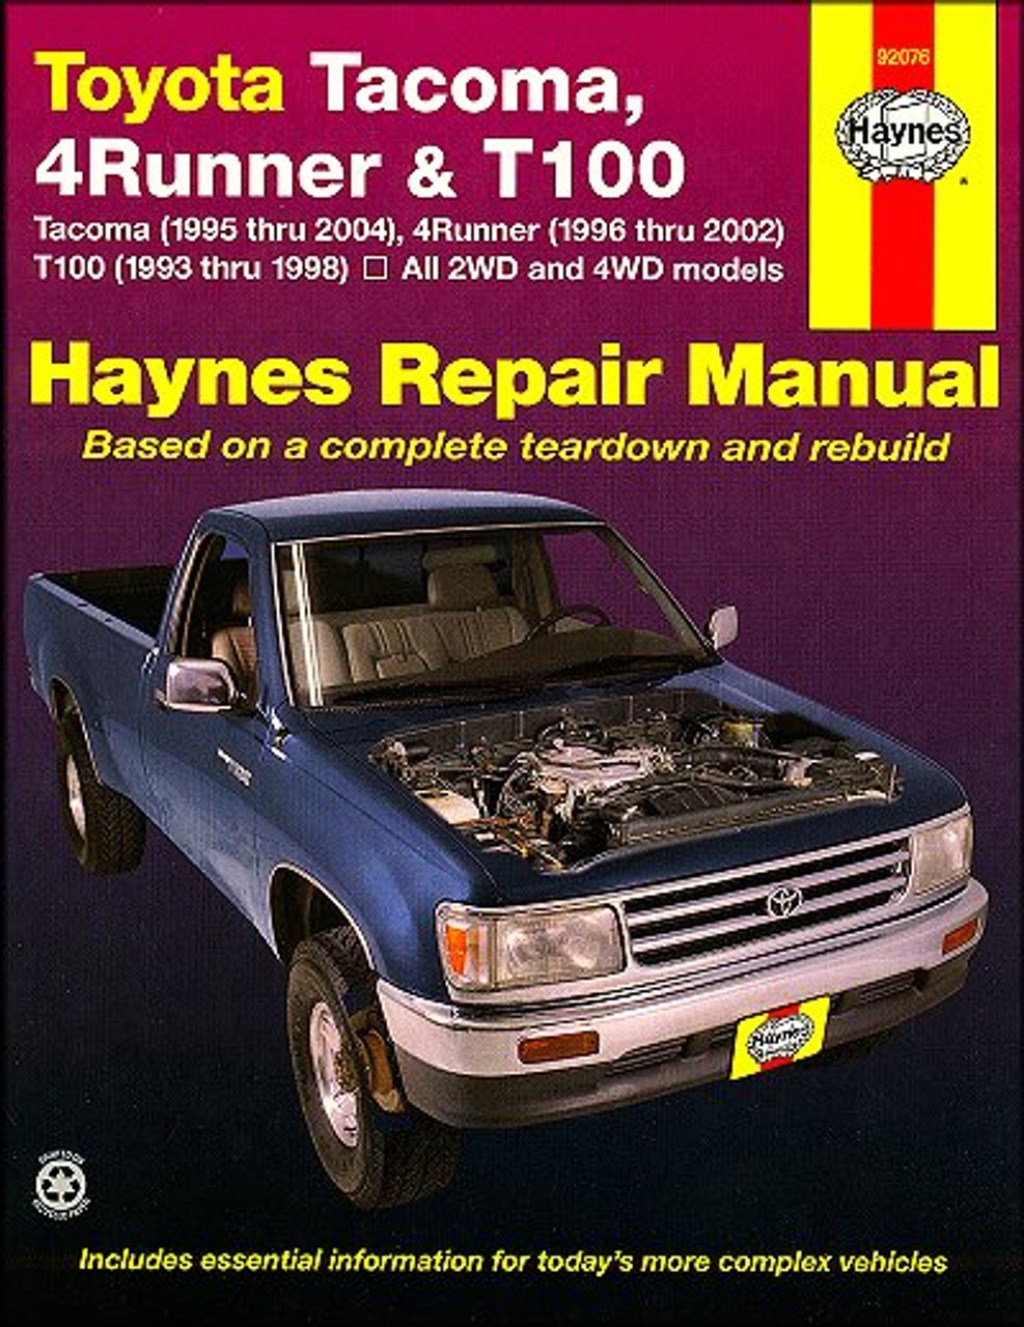 Picture of: Toyota Tacoma -, Runner -, T – Repair Manual